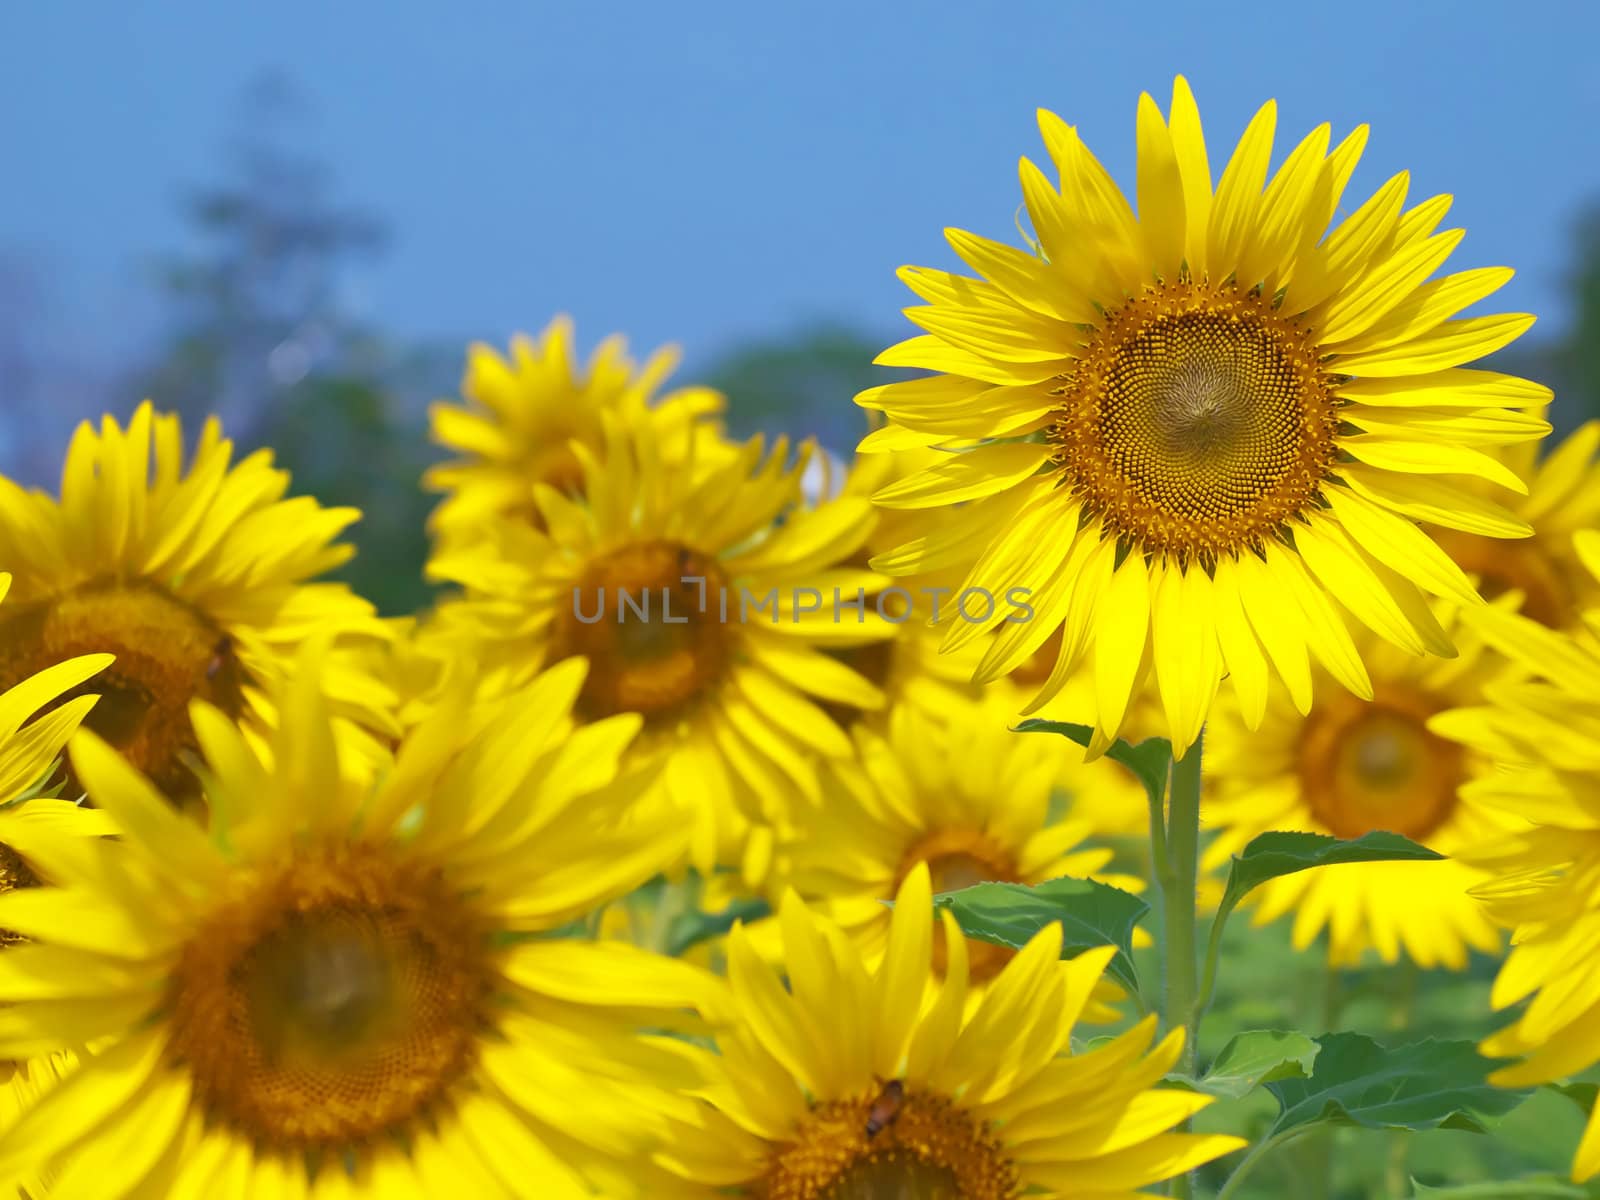 Sunflower field with out of focus background and foreground
